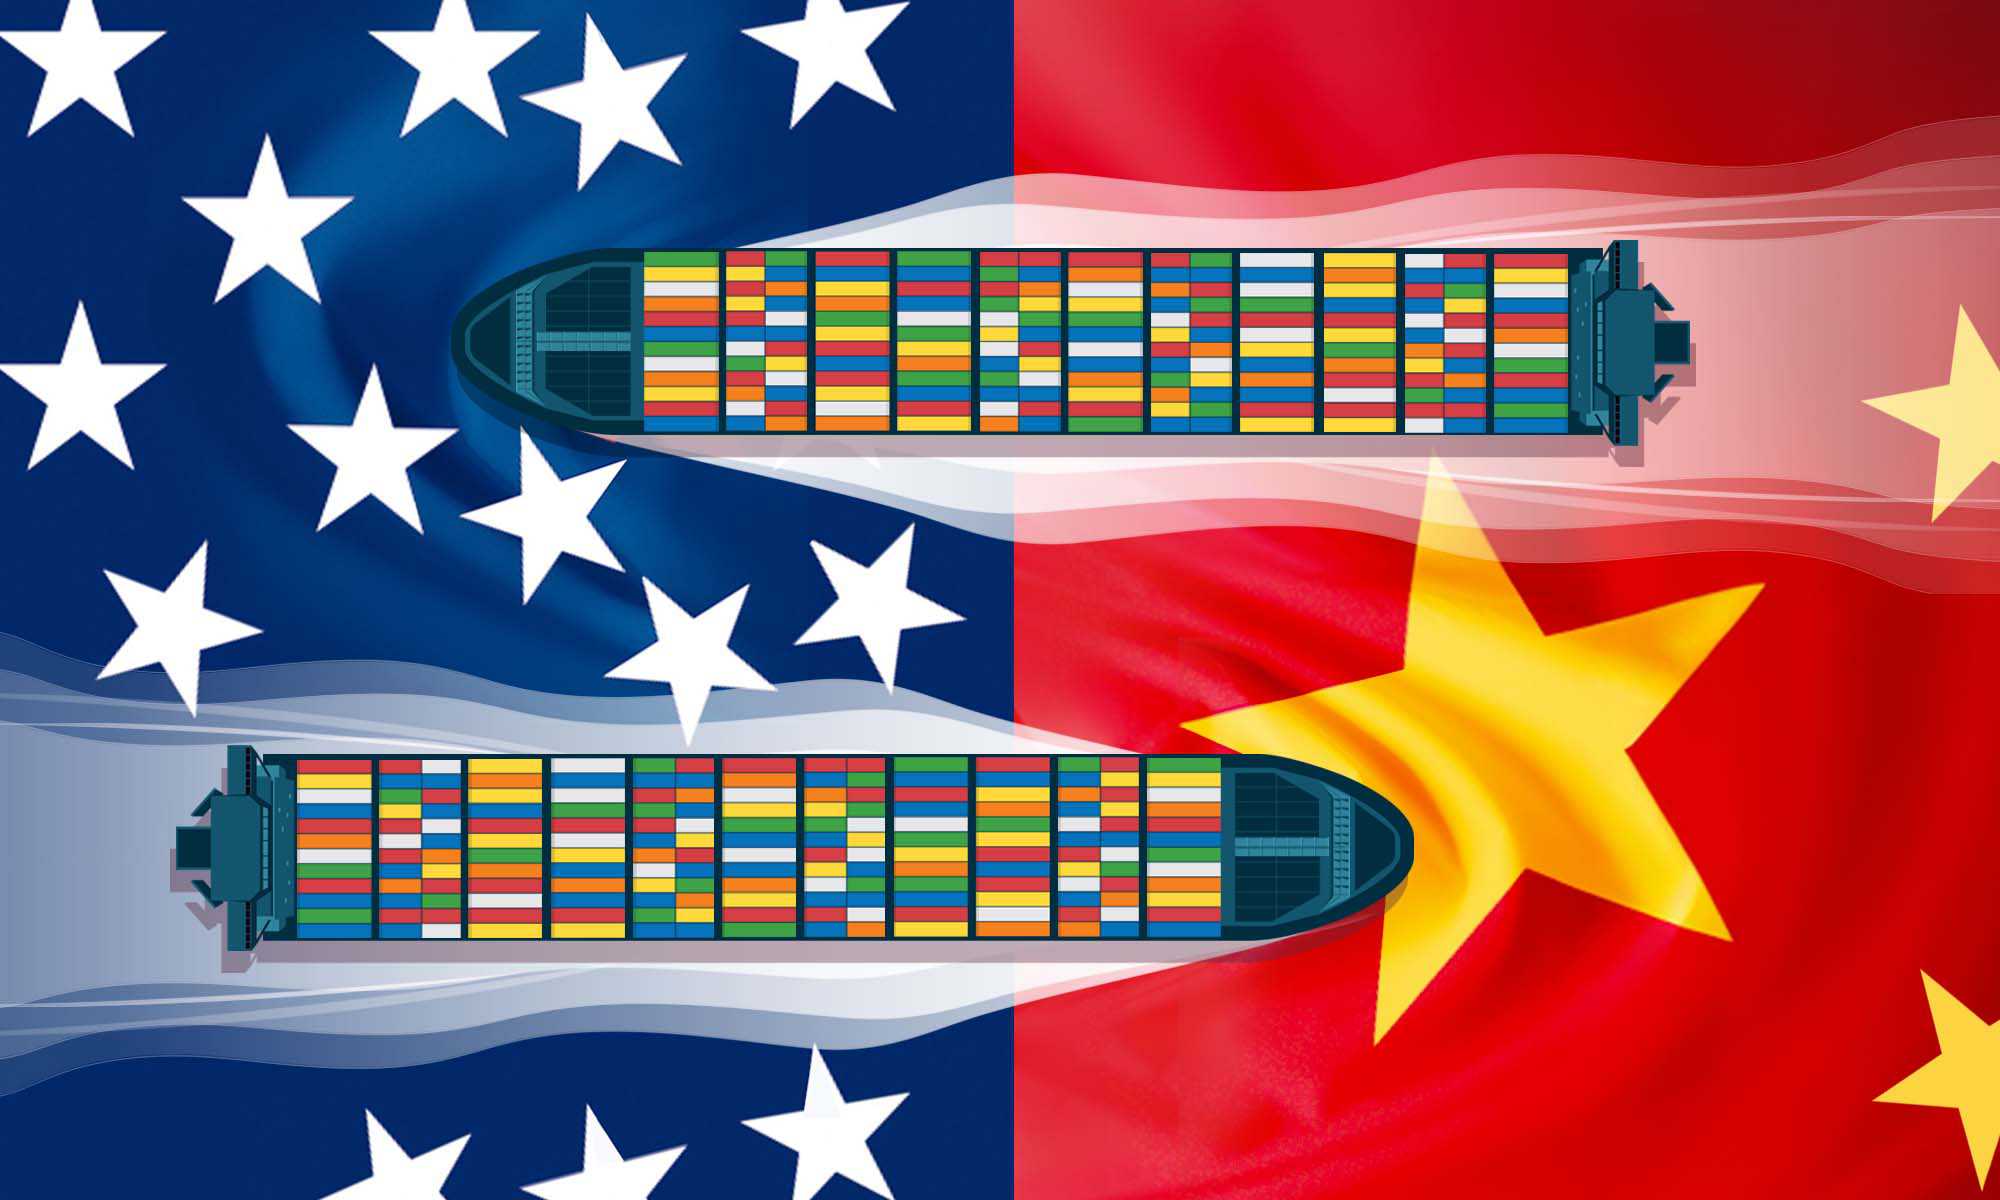 Illustration showing two cargo boats moving in opposite directions against a background that is half white stars against a blue background and half yellow stars against a red background to illustrate the US-China trade war.